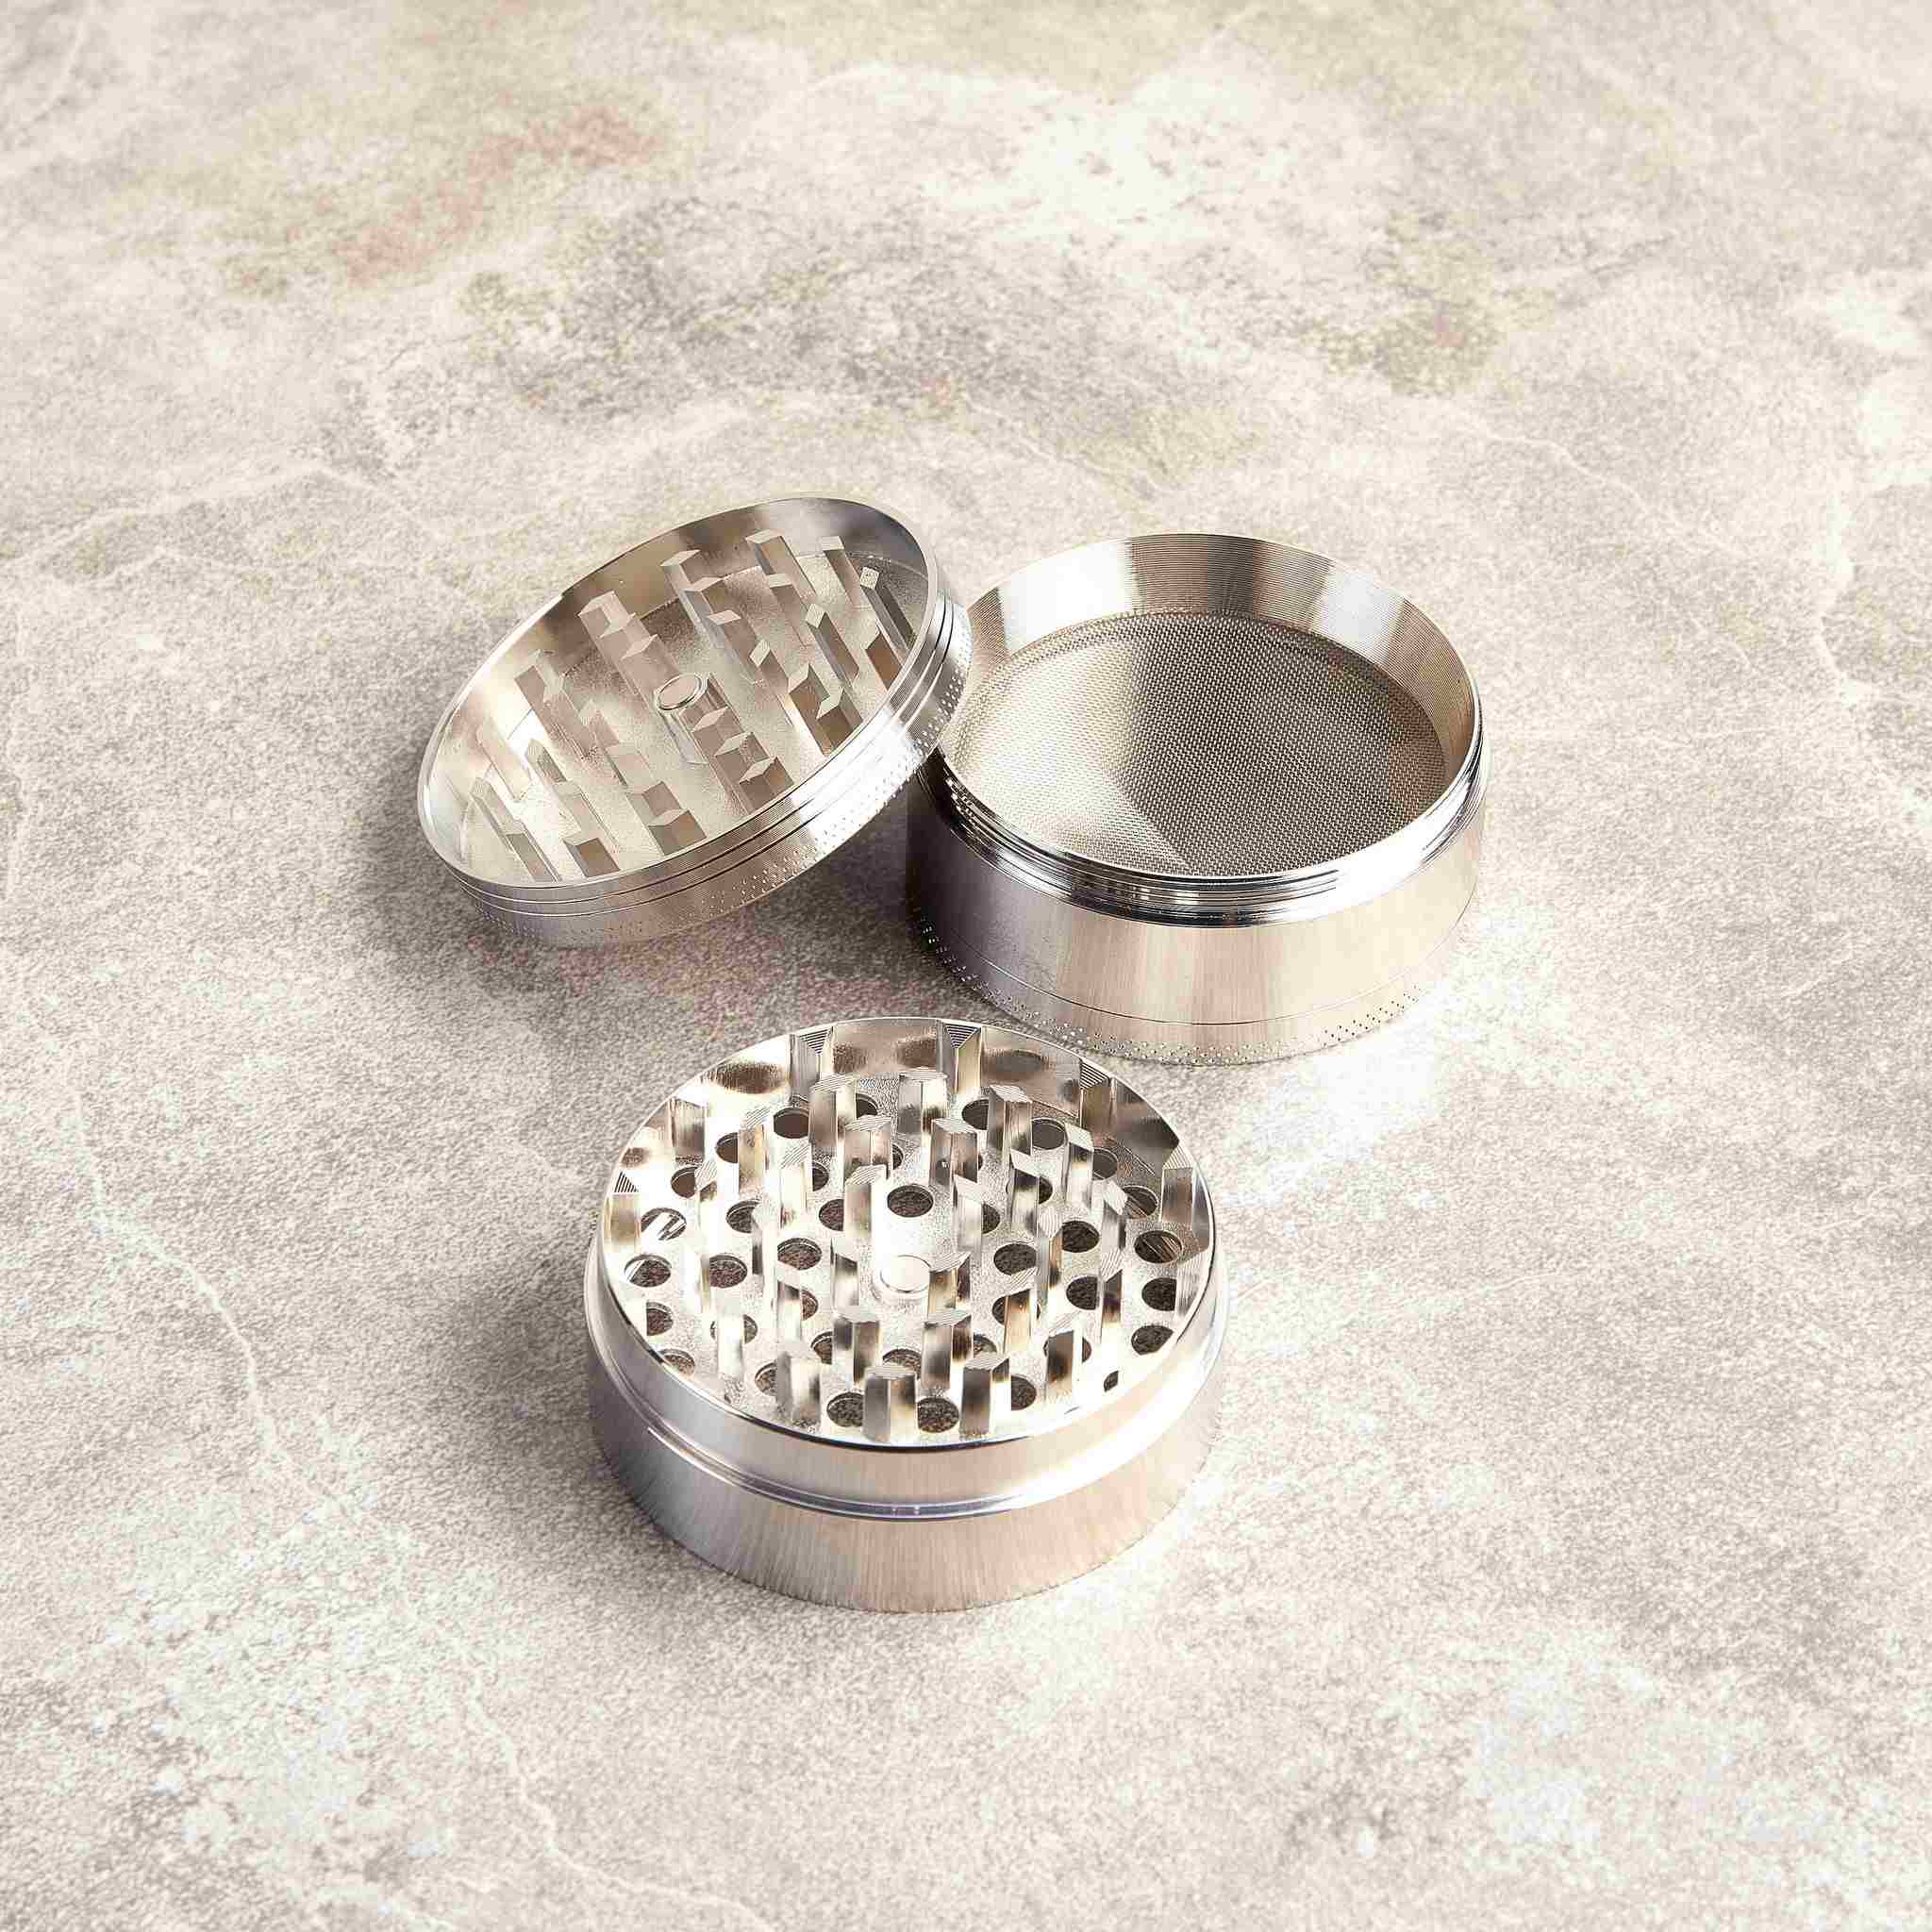 4-piece grinder with screen